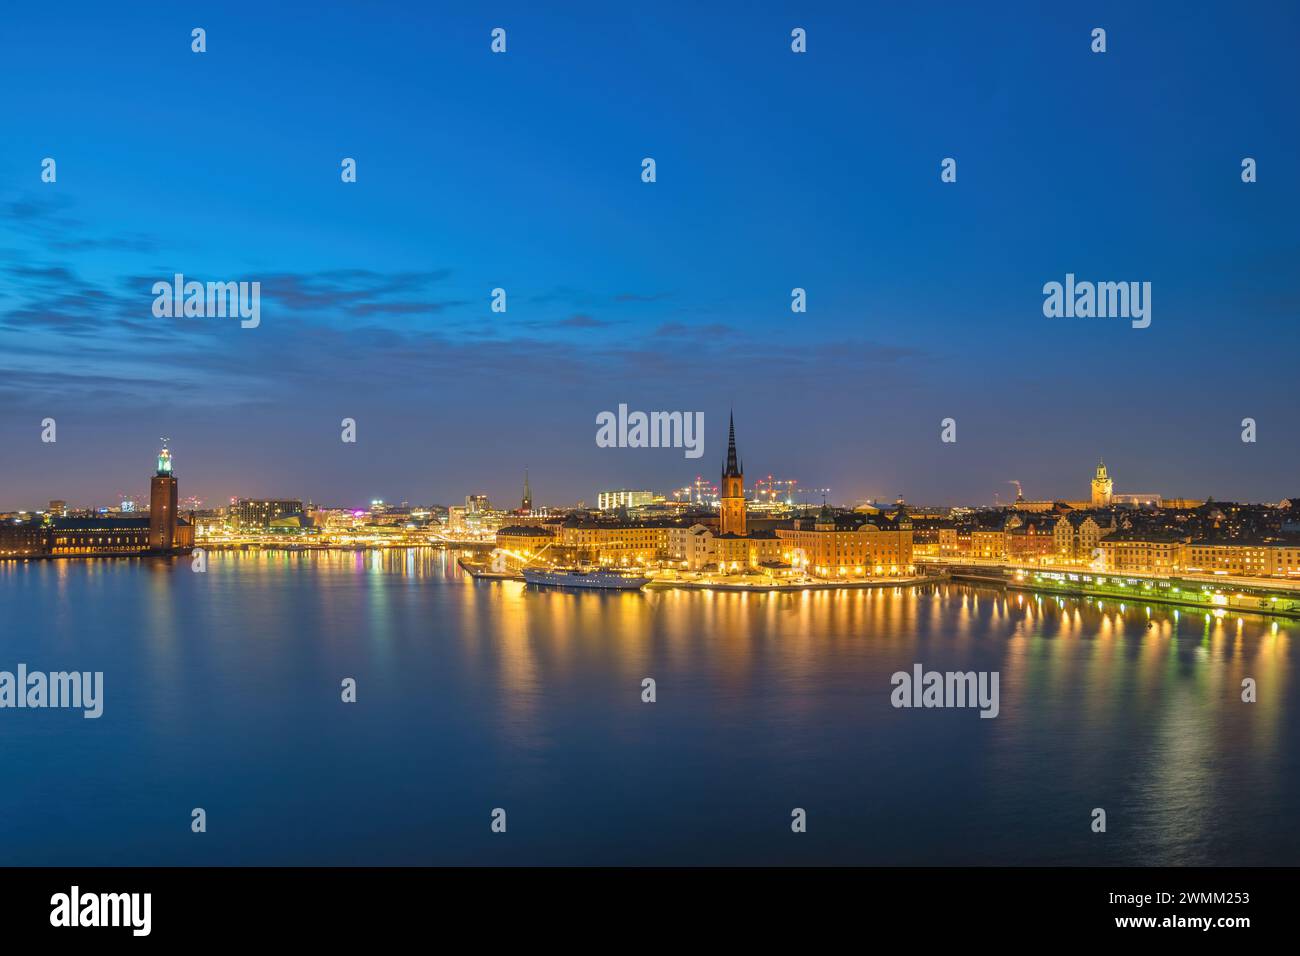 Stockholm Sweden, night city skyline at Stockholm City Hall and Gamla Stan Stock Photo